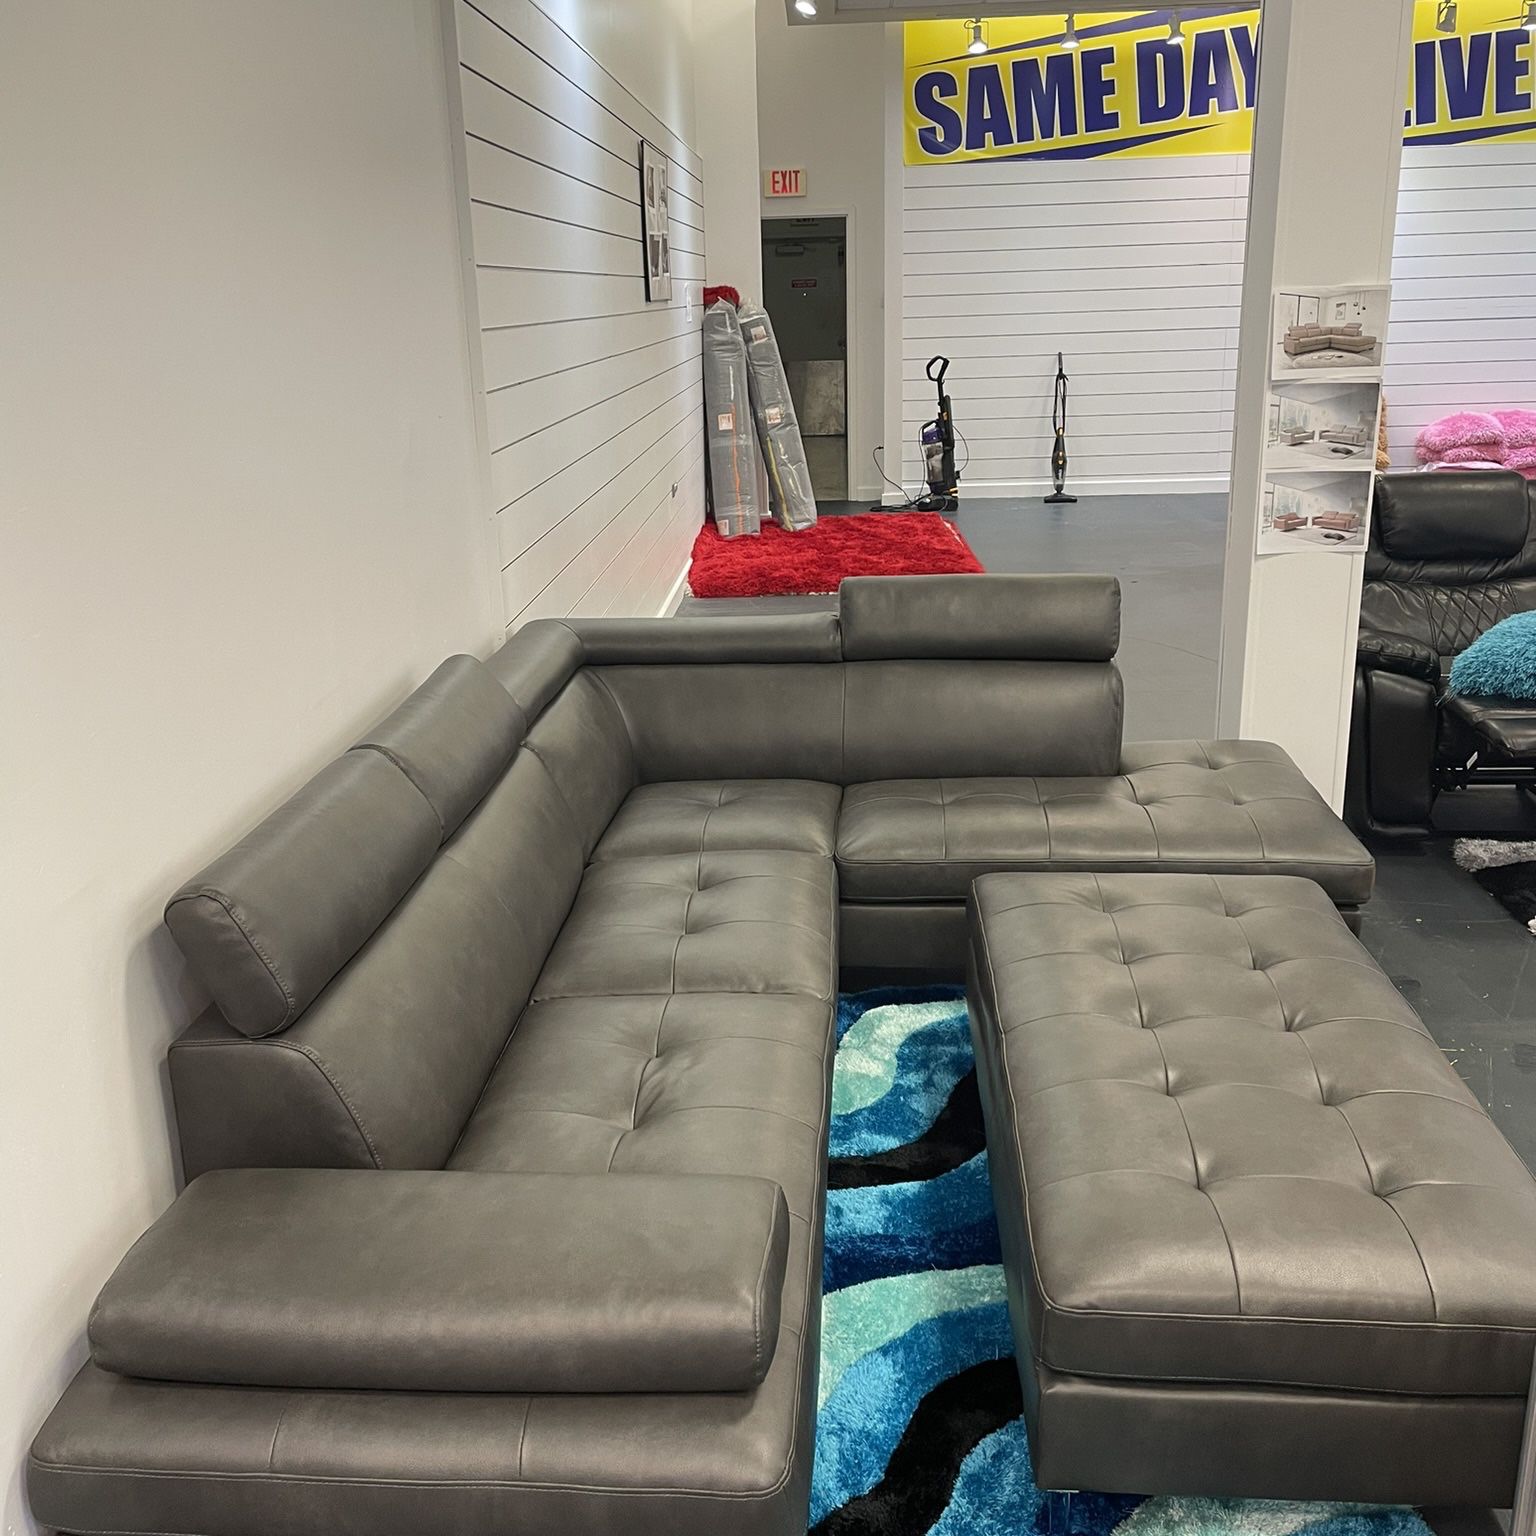 Ibiza Gray Sectional With Ottoman Only $699. Easy Finance Option. Same-Day Delivery.